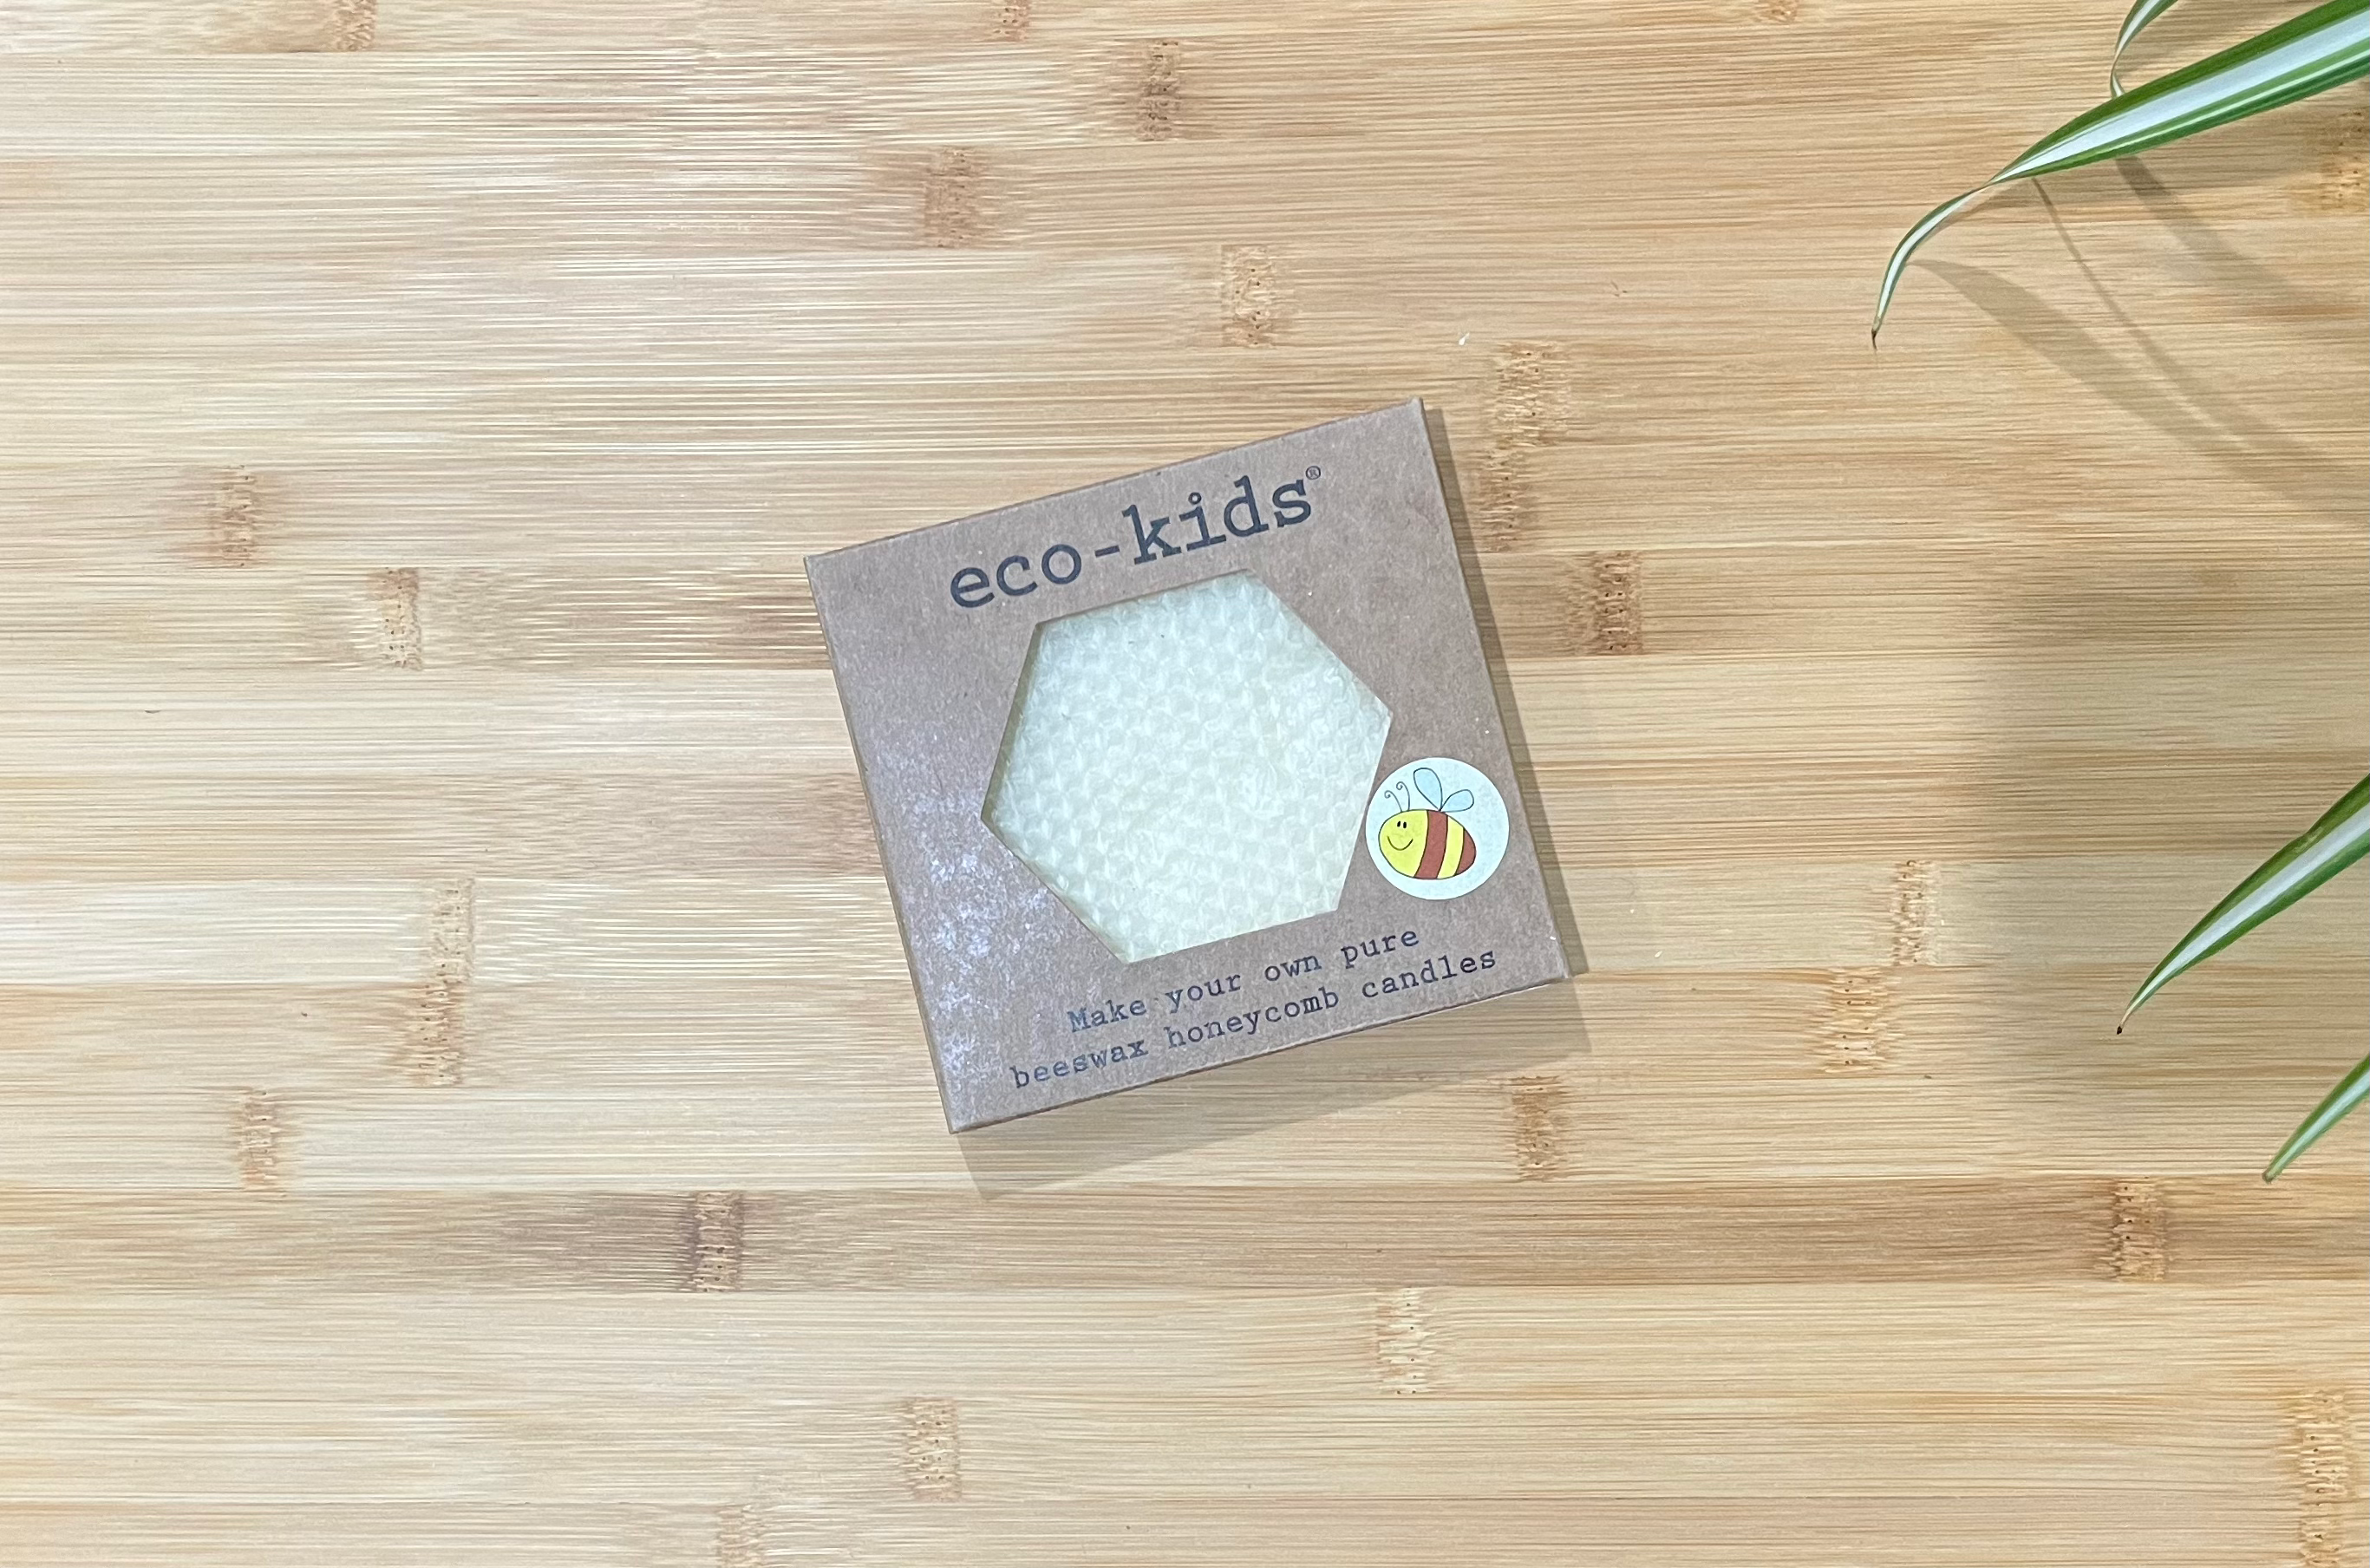 Eco Kids Make Your Own beeswax Honeycomb Candles